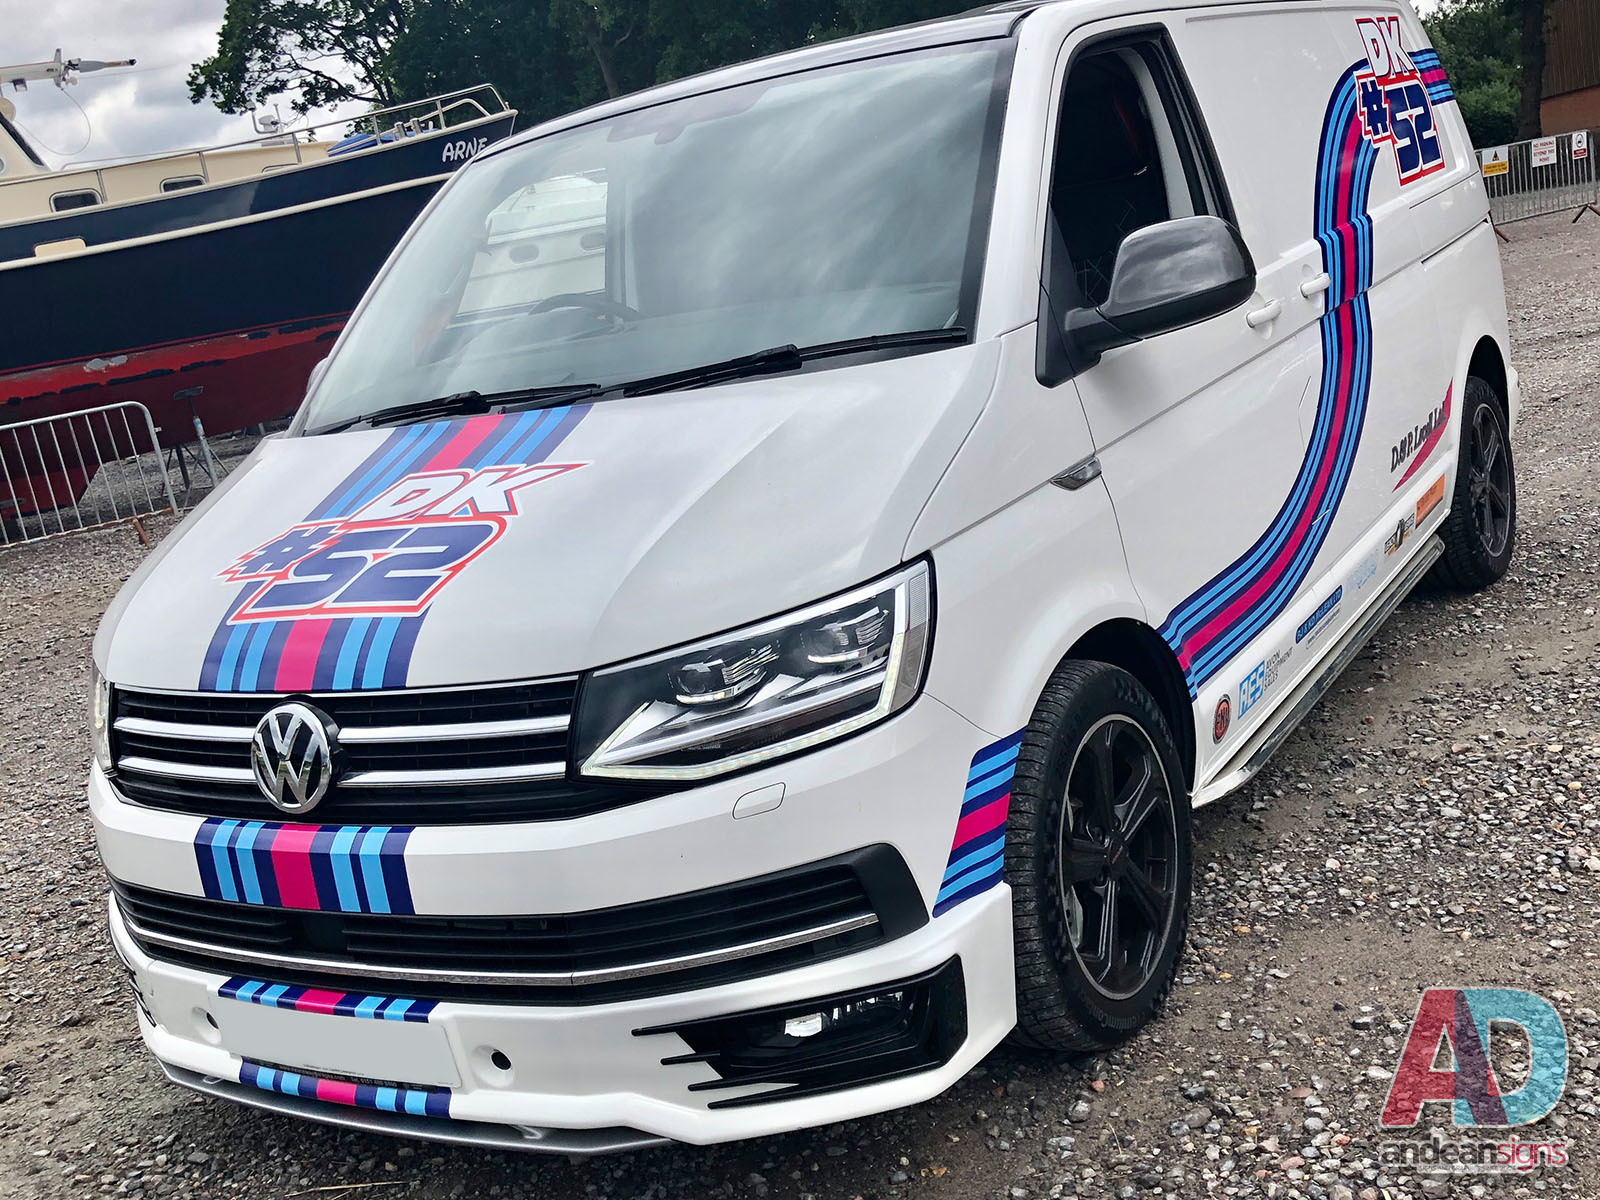 Volkswagen Transporter with a digitally printed motocross livery